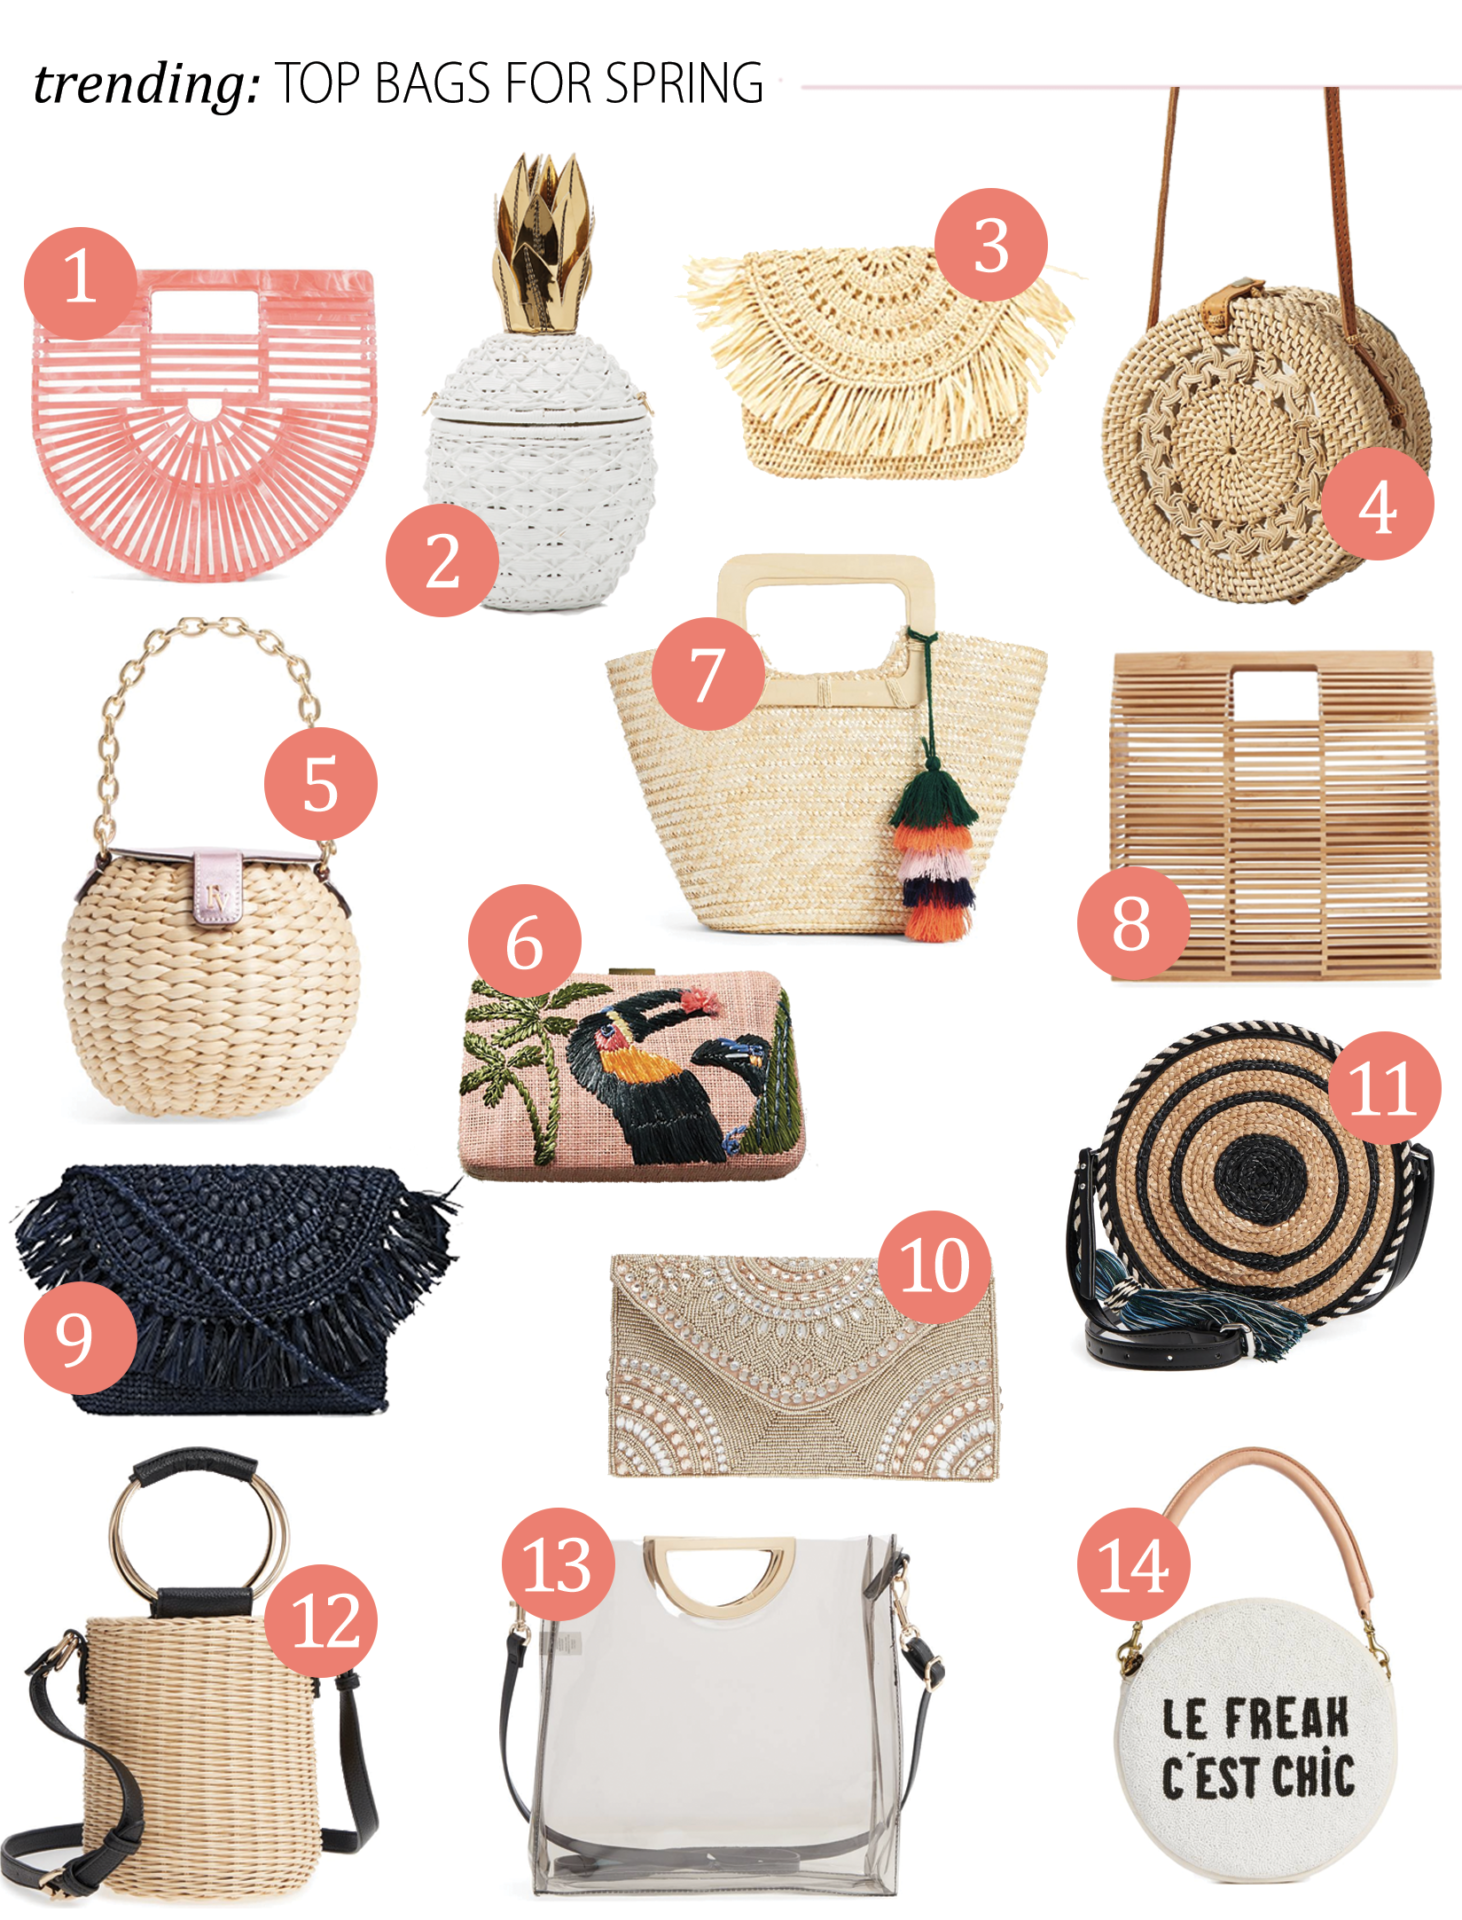 Which are the Best Designer Bags on Sale? - M Loves M